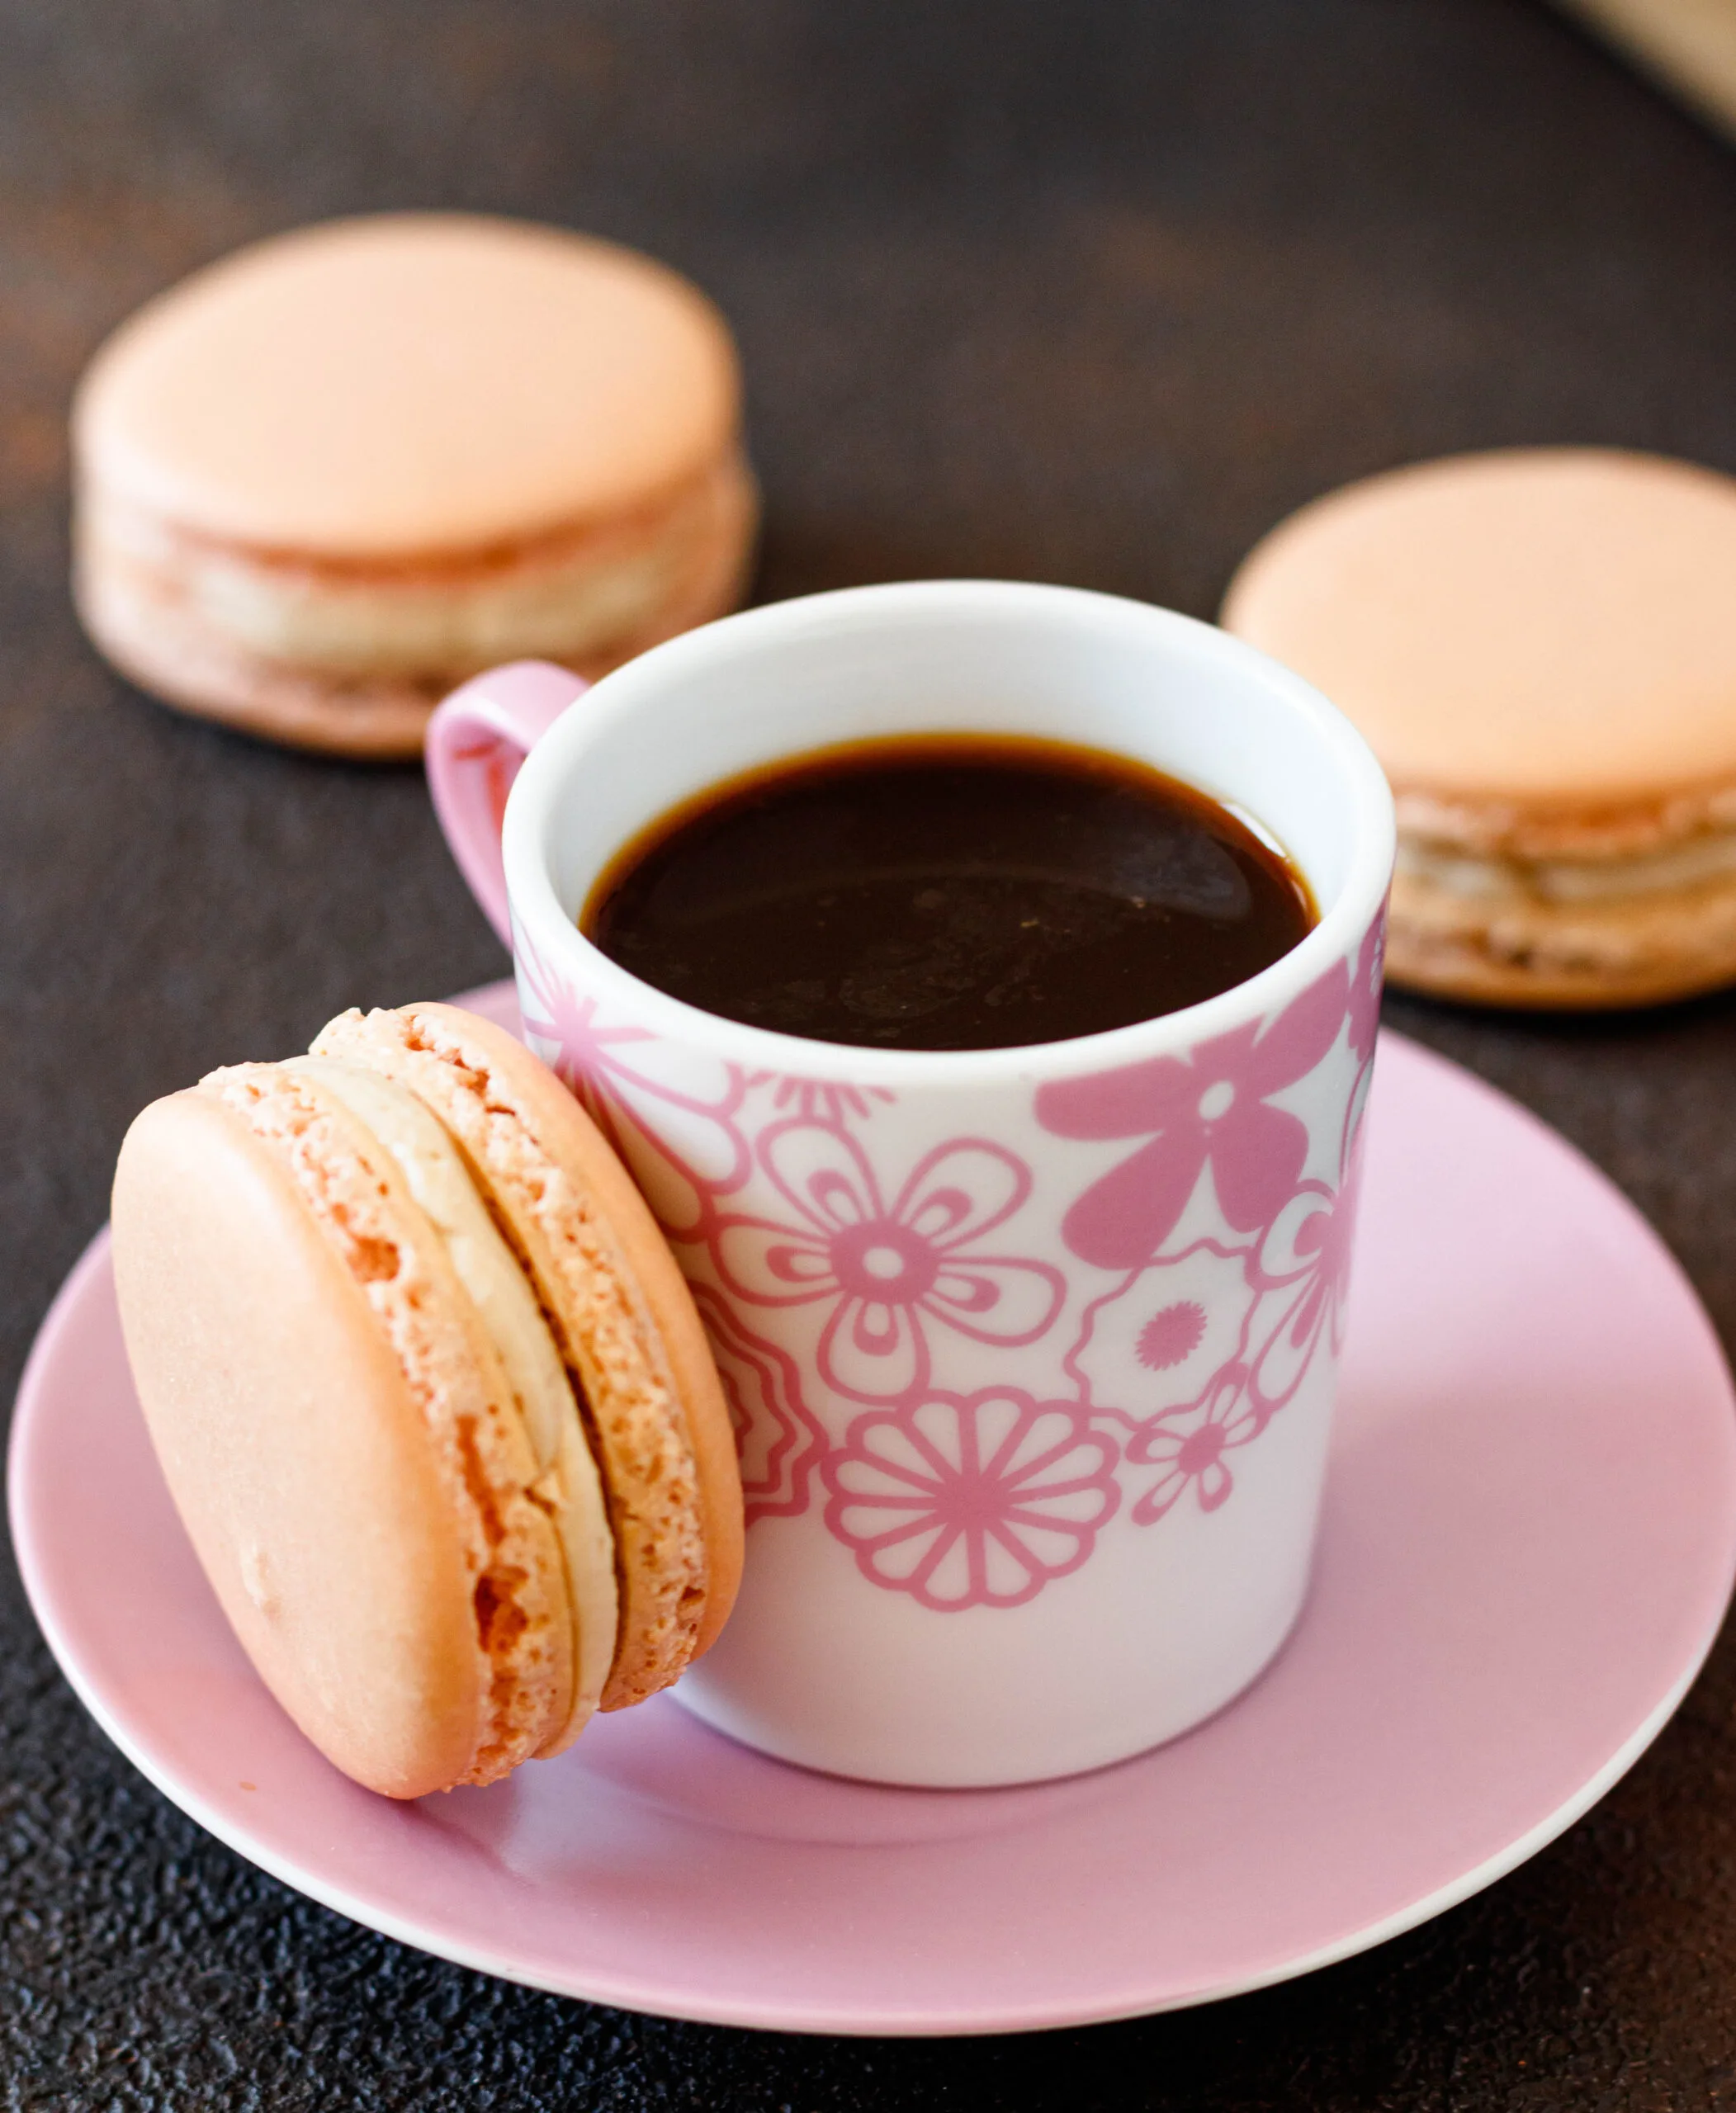 close up angled picture of the macaron alongside the shot of espresso in a pink floral cup on a pink saucer